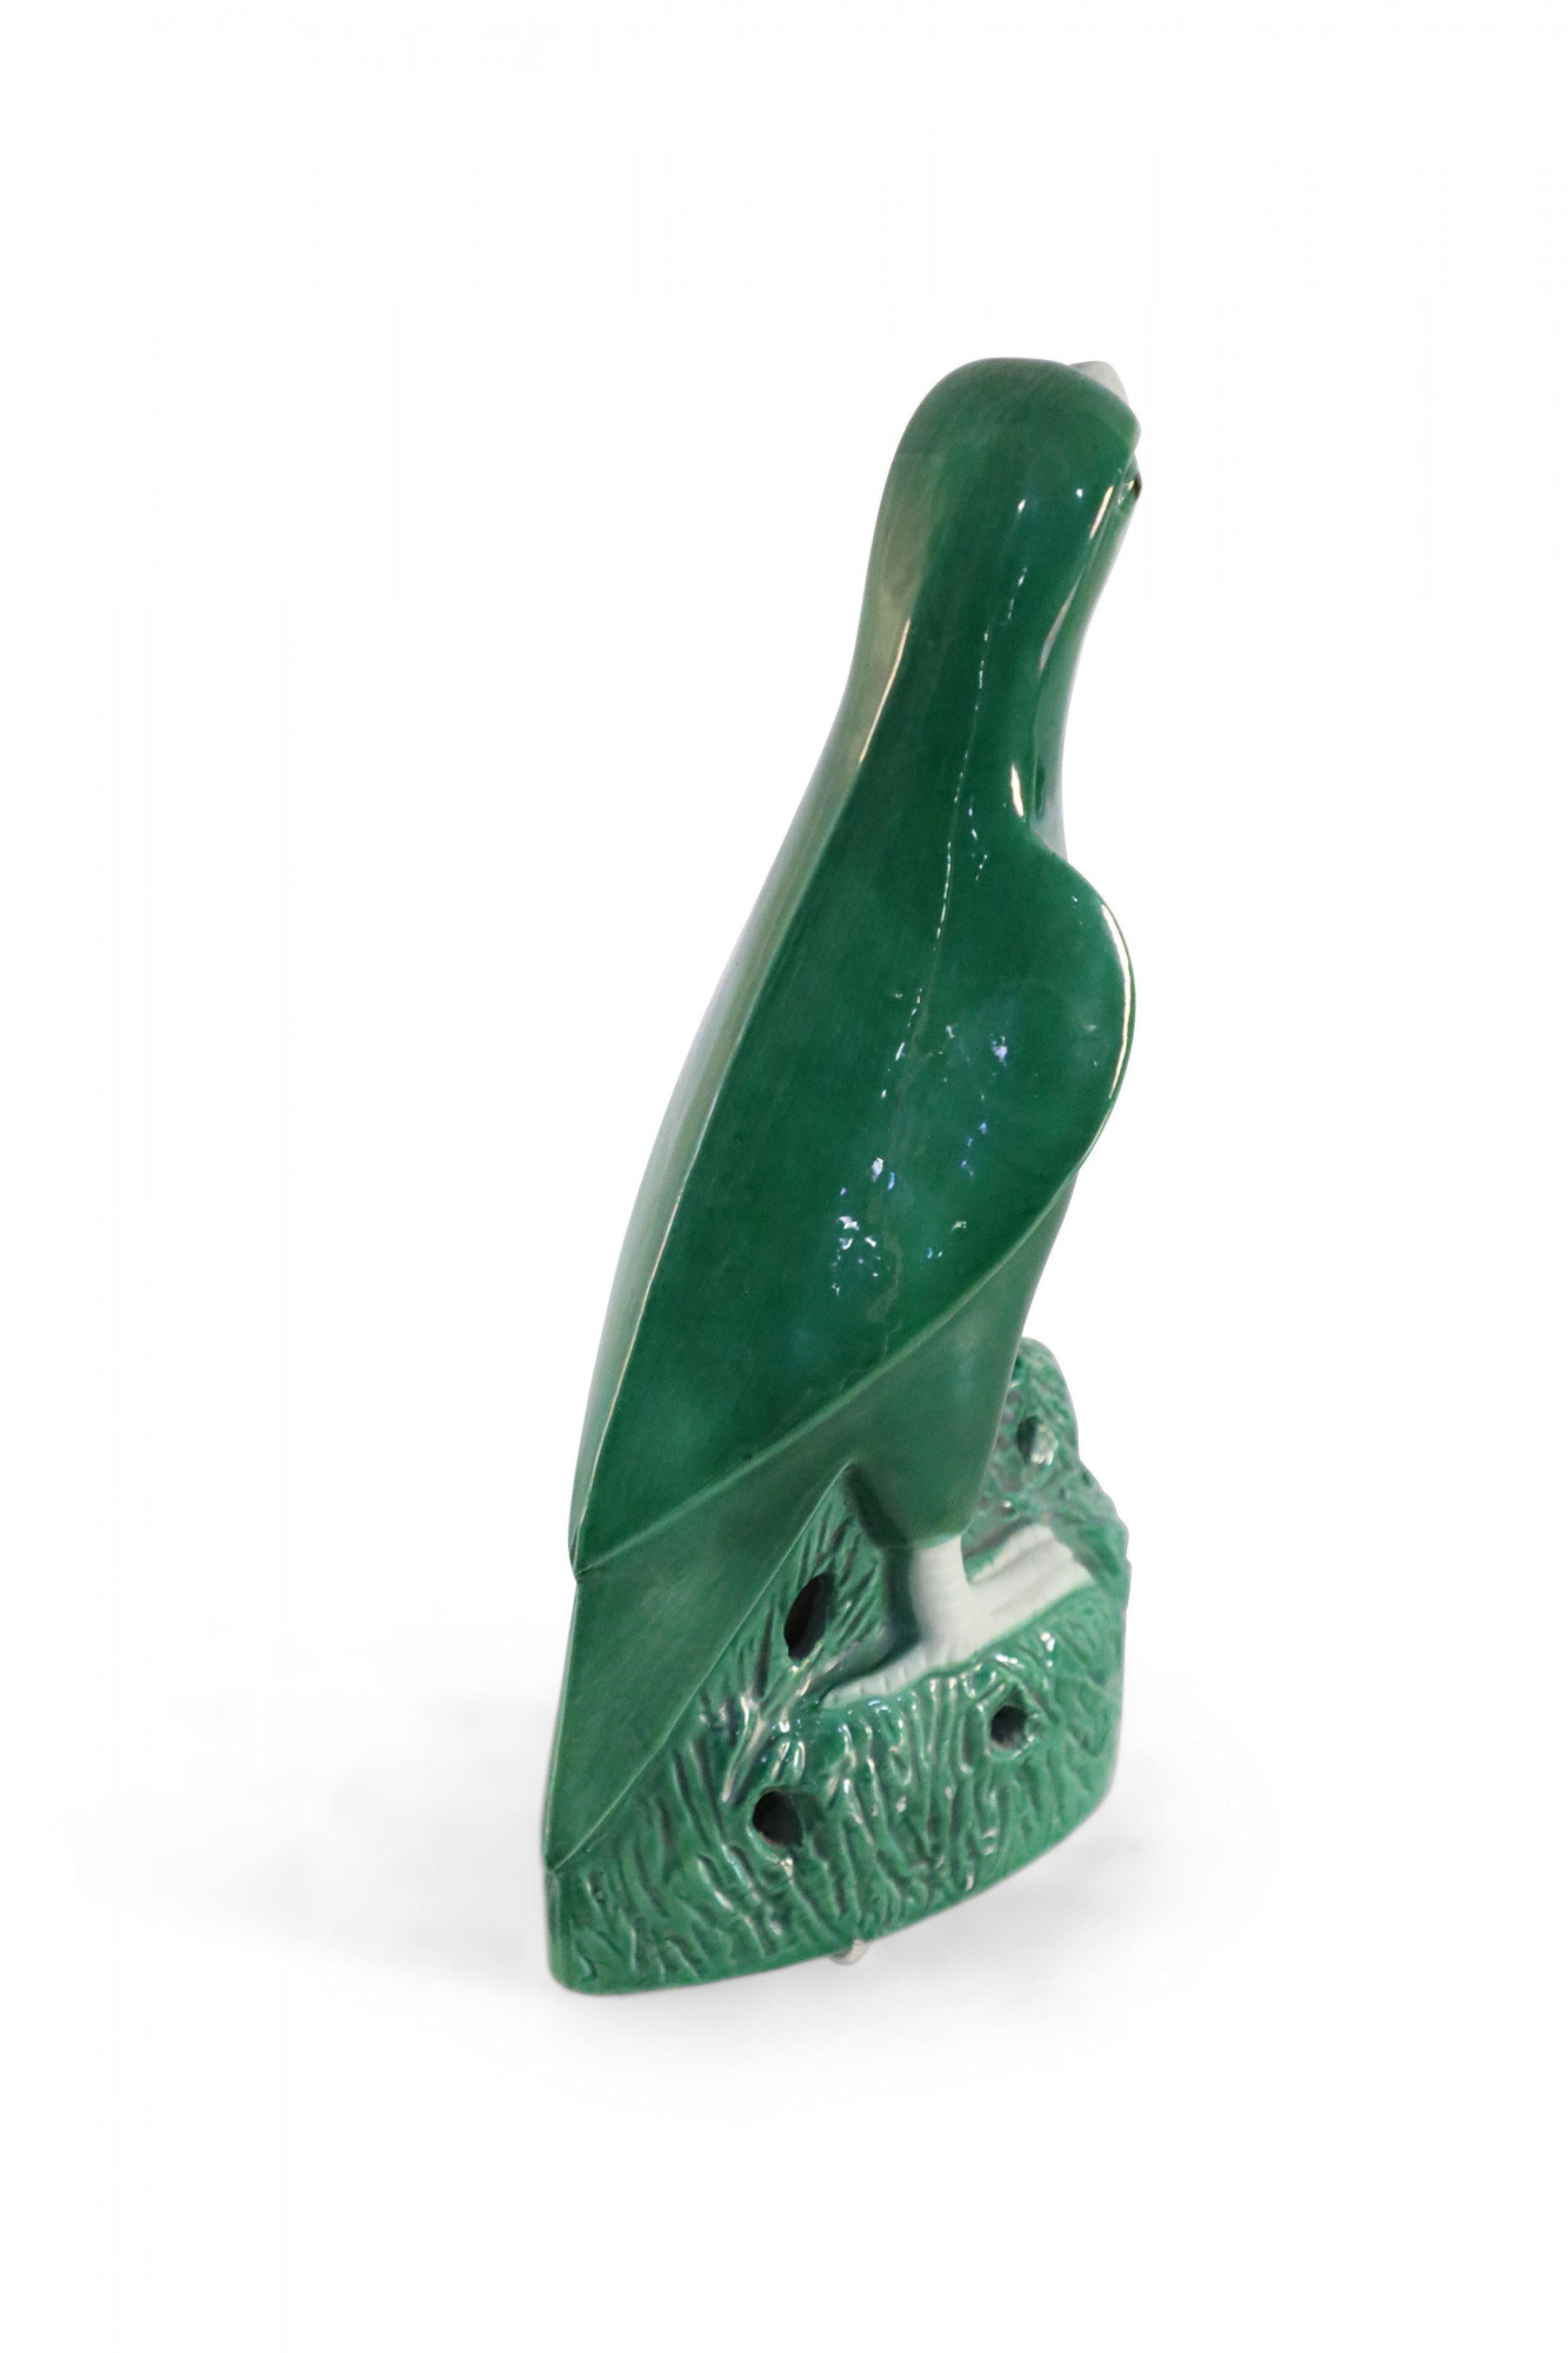 20th Century Chinese Green Glazed Porcelain Parrot Statue For Sale